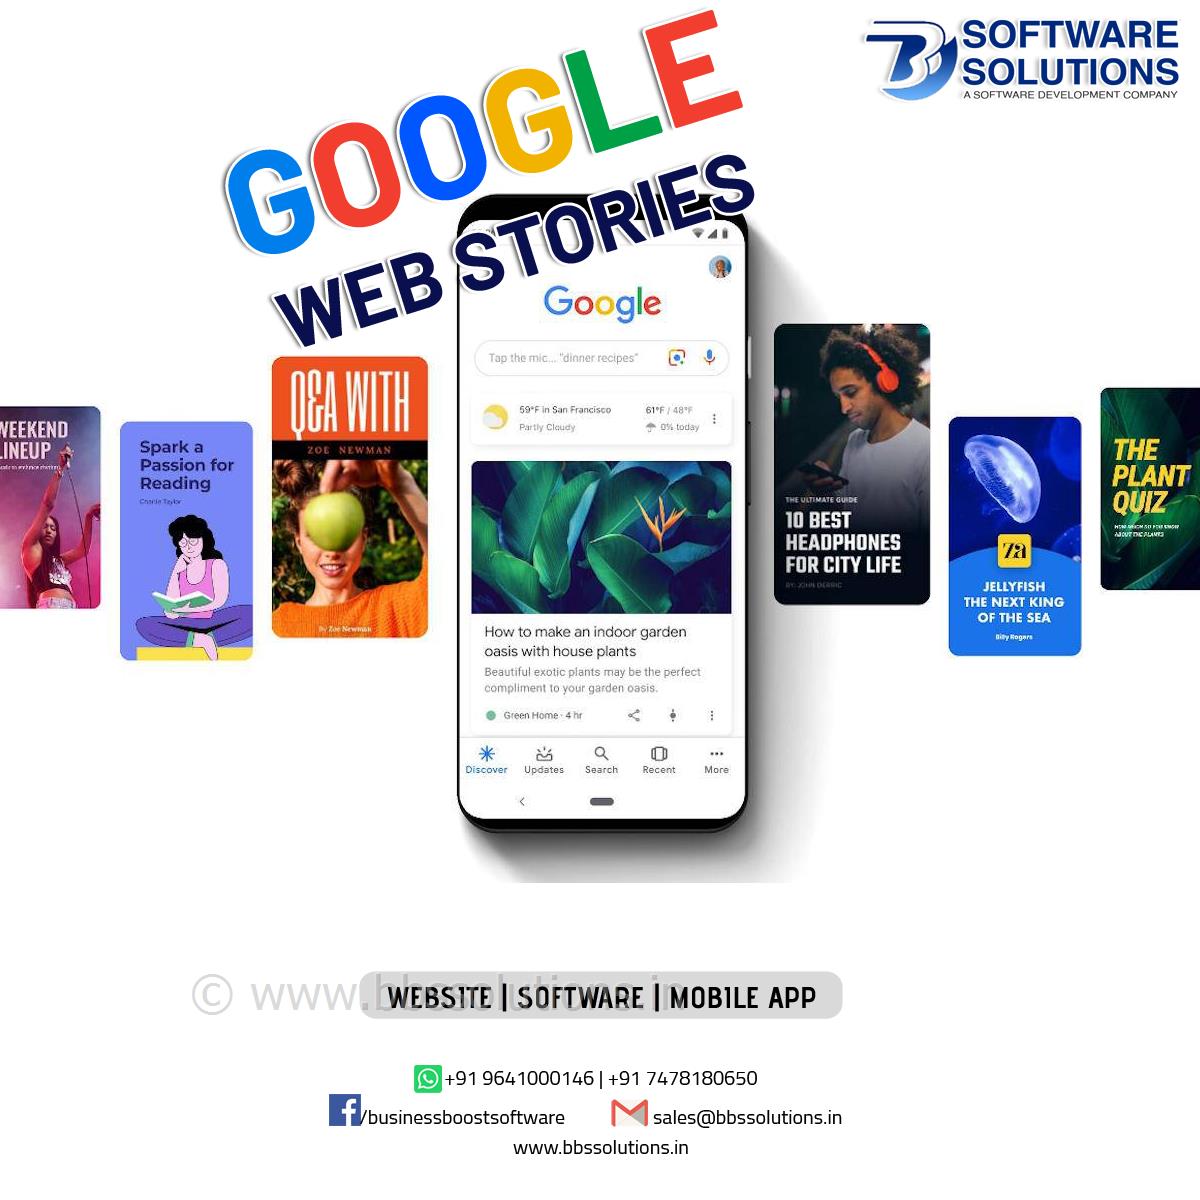 GOOGLE WEB STORIES : HOW TO DYNAMICALLY CREATE MULTIPLE GOOGLE WEB STO...  Business Boost Software Solutions do Best Software ,Web Development,Mobile App solutions provider in siliguri , india, WestBengal , Assam , Siliguri , Jalpaiguri ,Dhupguri,
    Best website designing in Siliguri with affordable packages and quick support. Get effective website design in Siliguri from best website designers. #bbssolutions , #SEO  , #DigitalMarketing  , #WebDesign  , #SoftwareDevelopment  , #FacebookAds  , #GoogleAds  , #GoogleSEO  , #WebsiteDesigning 
     , #Software  , #website  , #BusinessBoostSoftwareSolutions  , bbssolutions,SEO, Digital Marketing, WebDesign, Software Development, Facebook Ads, Google Ads, Google SEO, Website Designing, 
    Software, website, Business Boost Software Solutions, 9641000146,7478180650,best GST software in West bengal,Best GST software company in north bengal,GST solution in west bengal
    ,gst solutions in north bengal,best customize software in siliguri , india,best customize software in west bengal,best customize software in dhupguri,news portal website in west bengal
    ,news portal website in siliguri , india,regional news portal website in siliguri , india,school software in west bengal,school software in north bengal,school website in north bengal,
    school software in north bengal,android app, ios app, ecommerce website, ecommerce software,Web designing, website designing, ecommerce website, how to make website, create website, 
    website development company, web page design, seo, search engine optimization, seo siliguri , india , 
    seo company, best seo company, seo services, responsive web design, web designing companies, 
    how to create a website, internet marketing, digital marketing, online marketing, social media marketing, 
    promotion,web designing in Siliguri,web designing in Siliguri siliguri , india,web designing in siliguri , india,GST Software  ,  GST Billing Software  ,  GST Accounting  ,  GST Ready Software,
    software company in siliguri,software company in siliguri siliguri , india,software company in north east siliguri , india,
    school software in siliguri,school software in north east siliguri , india,customize software,free software demo,
    reasonable price software,cost effective software,resonable price software,free demo software,free software,best software support,free software support,best software company in siliguri , india,
    best software company in siliguri,MLM Software company in Siliguri,Binary Software company in Siliguri,
    top ten software company in north bengal,top ten software company in siliguri,top ten software company in siliguri , india,
    top ten software company in north east,software development siliguri , india,west bengal,kolkata,siliguri , software company in siliguri , india
     , software development west bengal , Customized software siliguri , india , software for hotel,medicine distributors,
    jewellery shop , best software company in siliguri,jalpaiguri,sikkim,darjeeling  , Business Boost Softwate Solutions  ,  
    Web designing company in siliguri  ,  ecommerce designing company in siliguri  ,  web development company in siliguri  ,  
    software development comapny in siliguri  ,  software development in sikkim  ,  website designing company in sikkim  ,  
    SEO service in sikkim  ,  web designing company in siliguri  ,  web designing compnay in North Bengal  ,  
    SEO service in siliguri  ,  web designing in north bengal  ,  web designing in north east siliguri , india , website designing in siliguri, best website designing in siliguri, web design, web designer in siliguri, web designing company siliguri